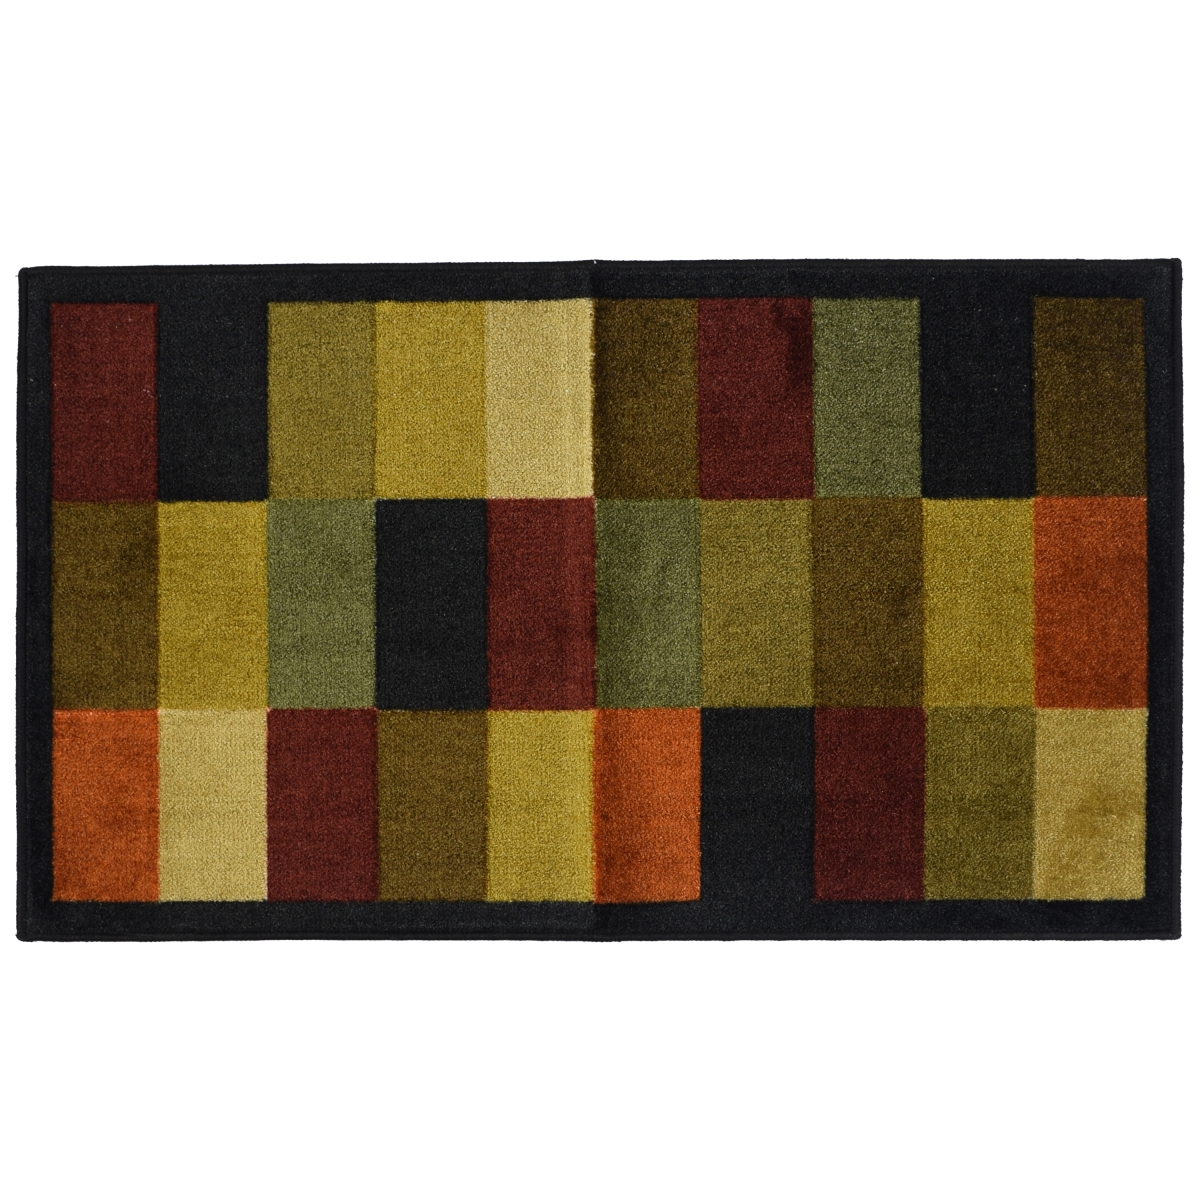 Picture of Madison Industries COLBL-26X45 26 x 45 in. Color Blocks Accent Rug, Multi-Color